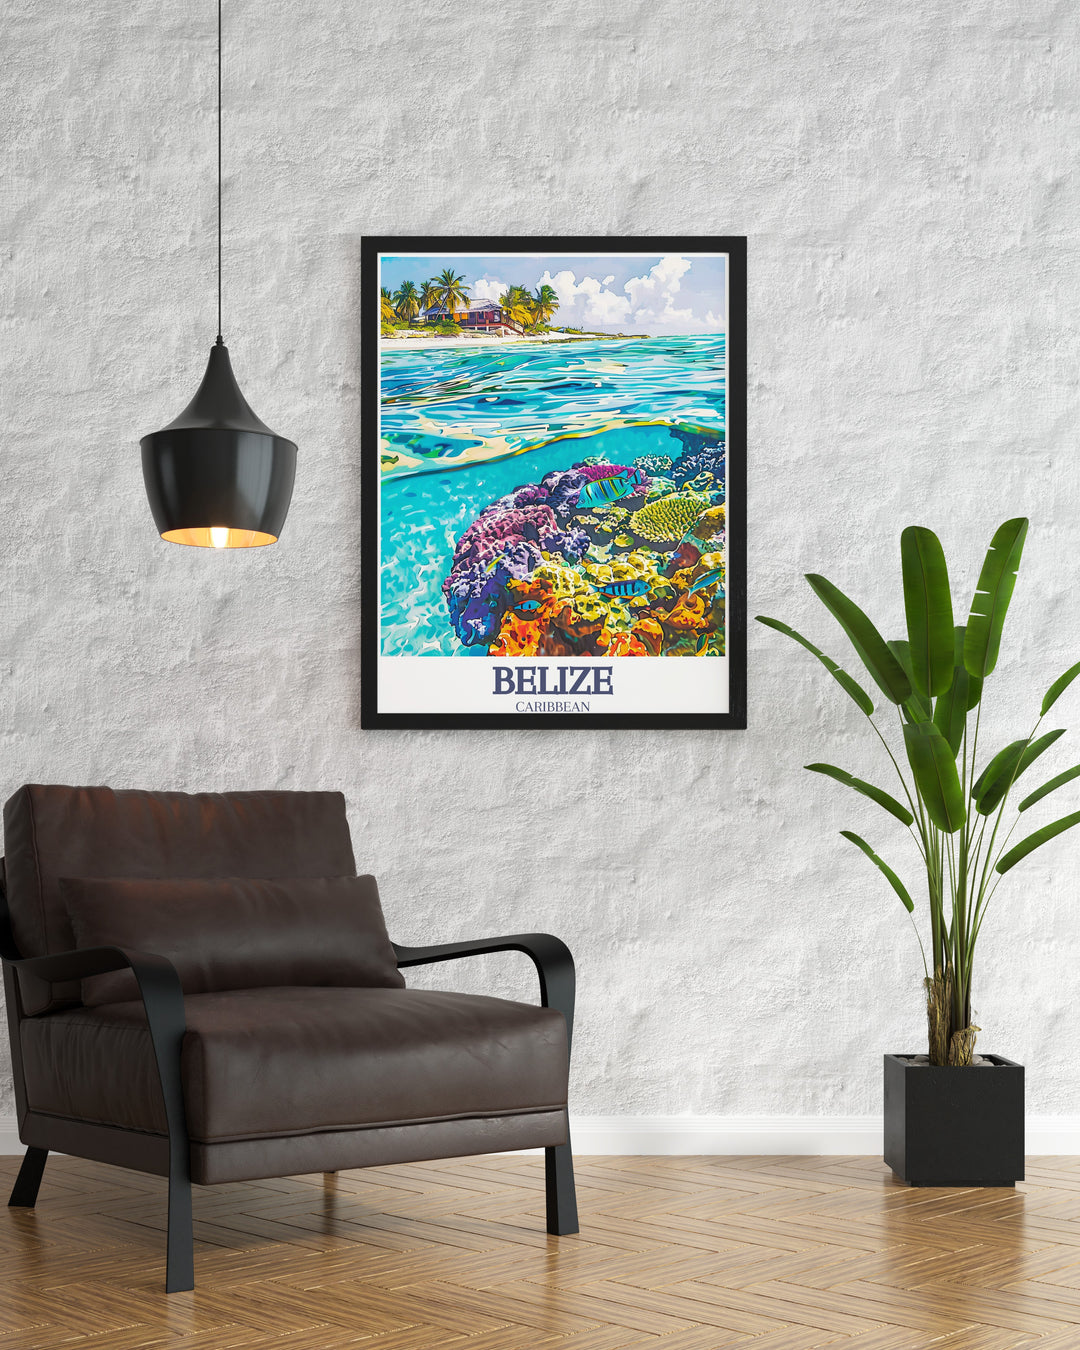 Belize Barrier Reef Belize Coast home decor featuring vibrant blues and greens intricate details of marine life perfect for bringing the warm sunny vibes of the Caribbean into your living space